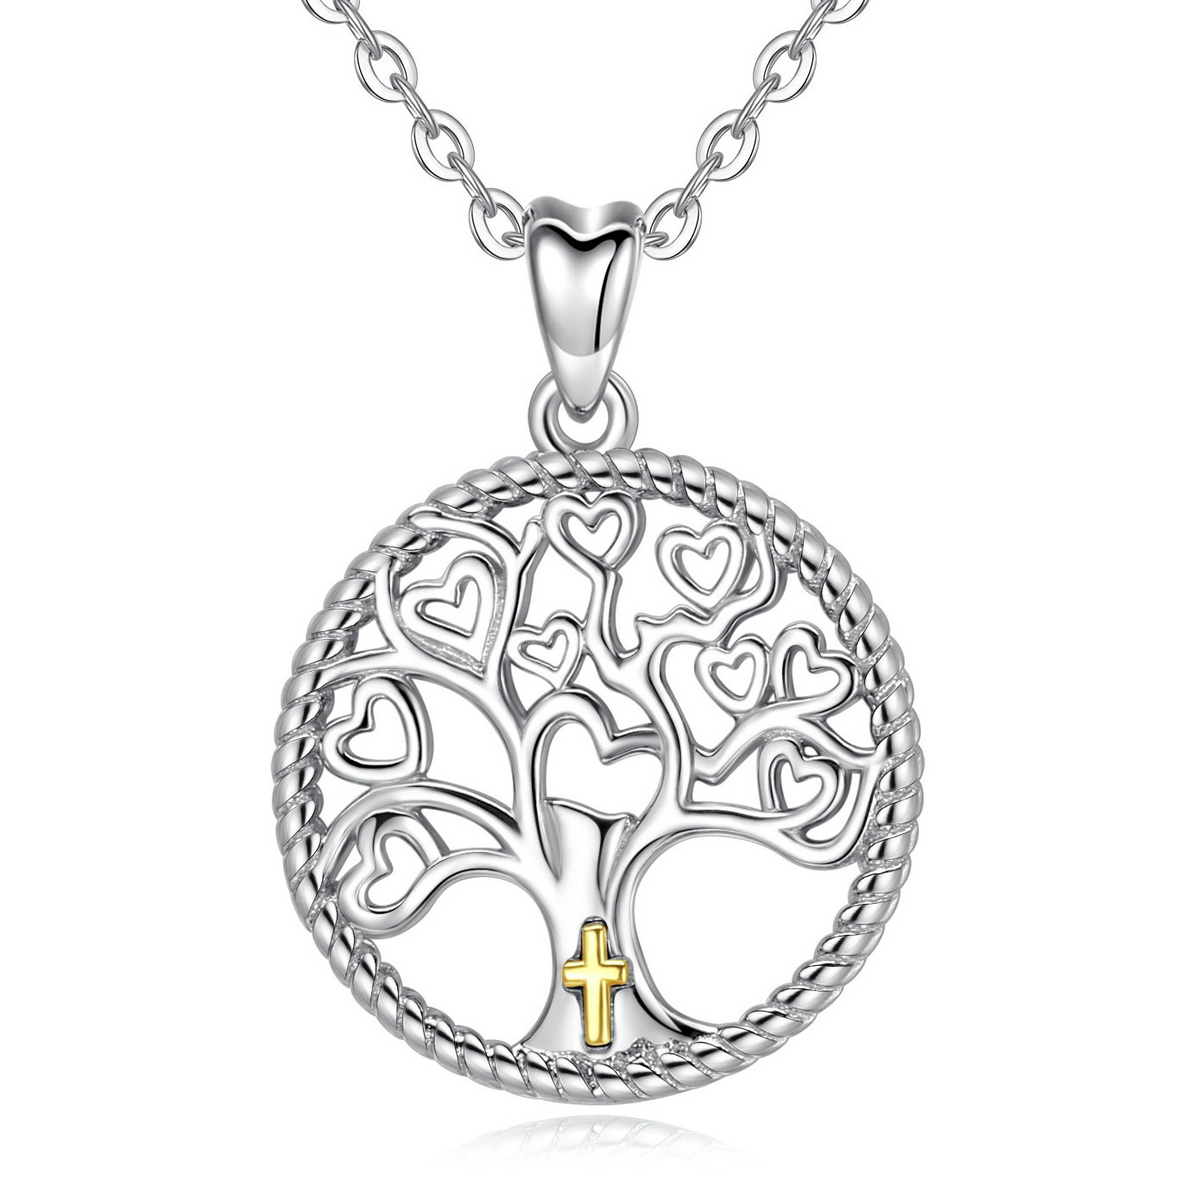 Merryshine Jewelry S925 Sterling Silver Dainty Handmade Family Tree of Life Necklace with Cross